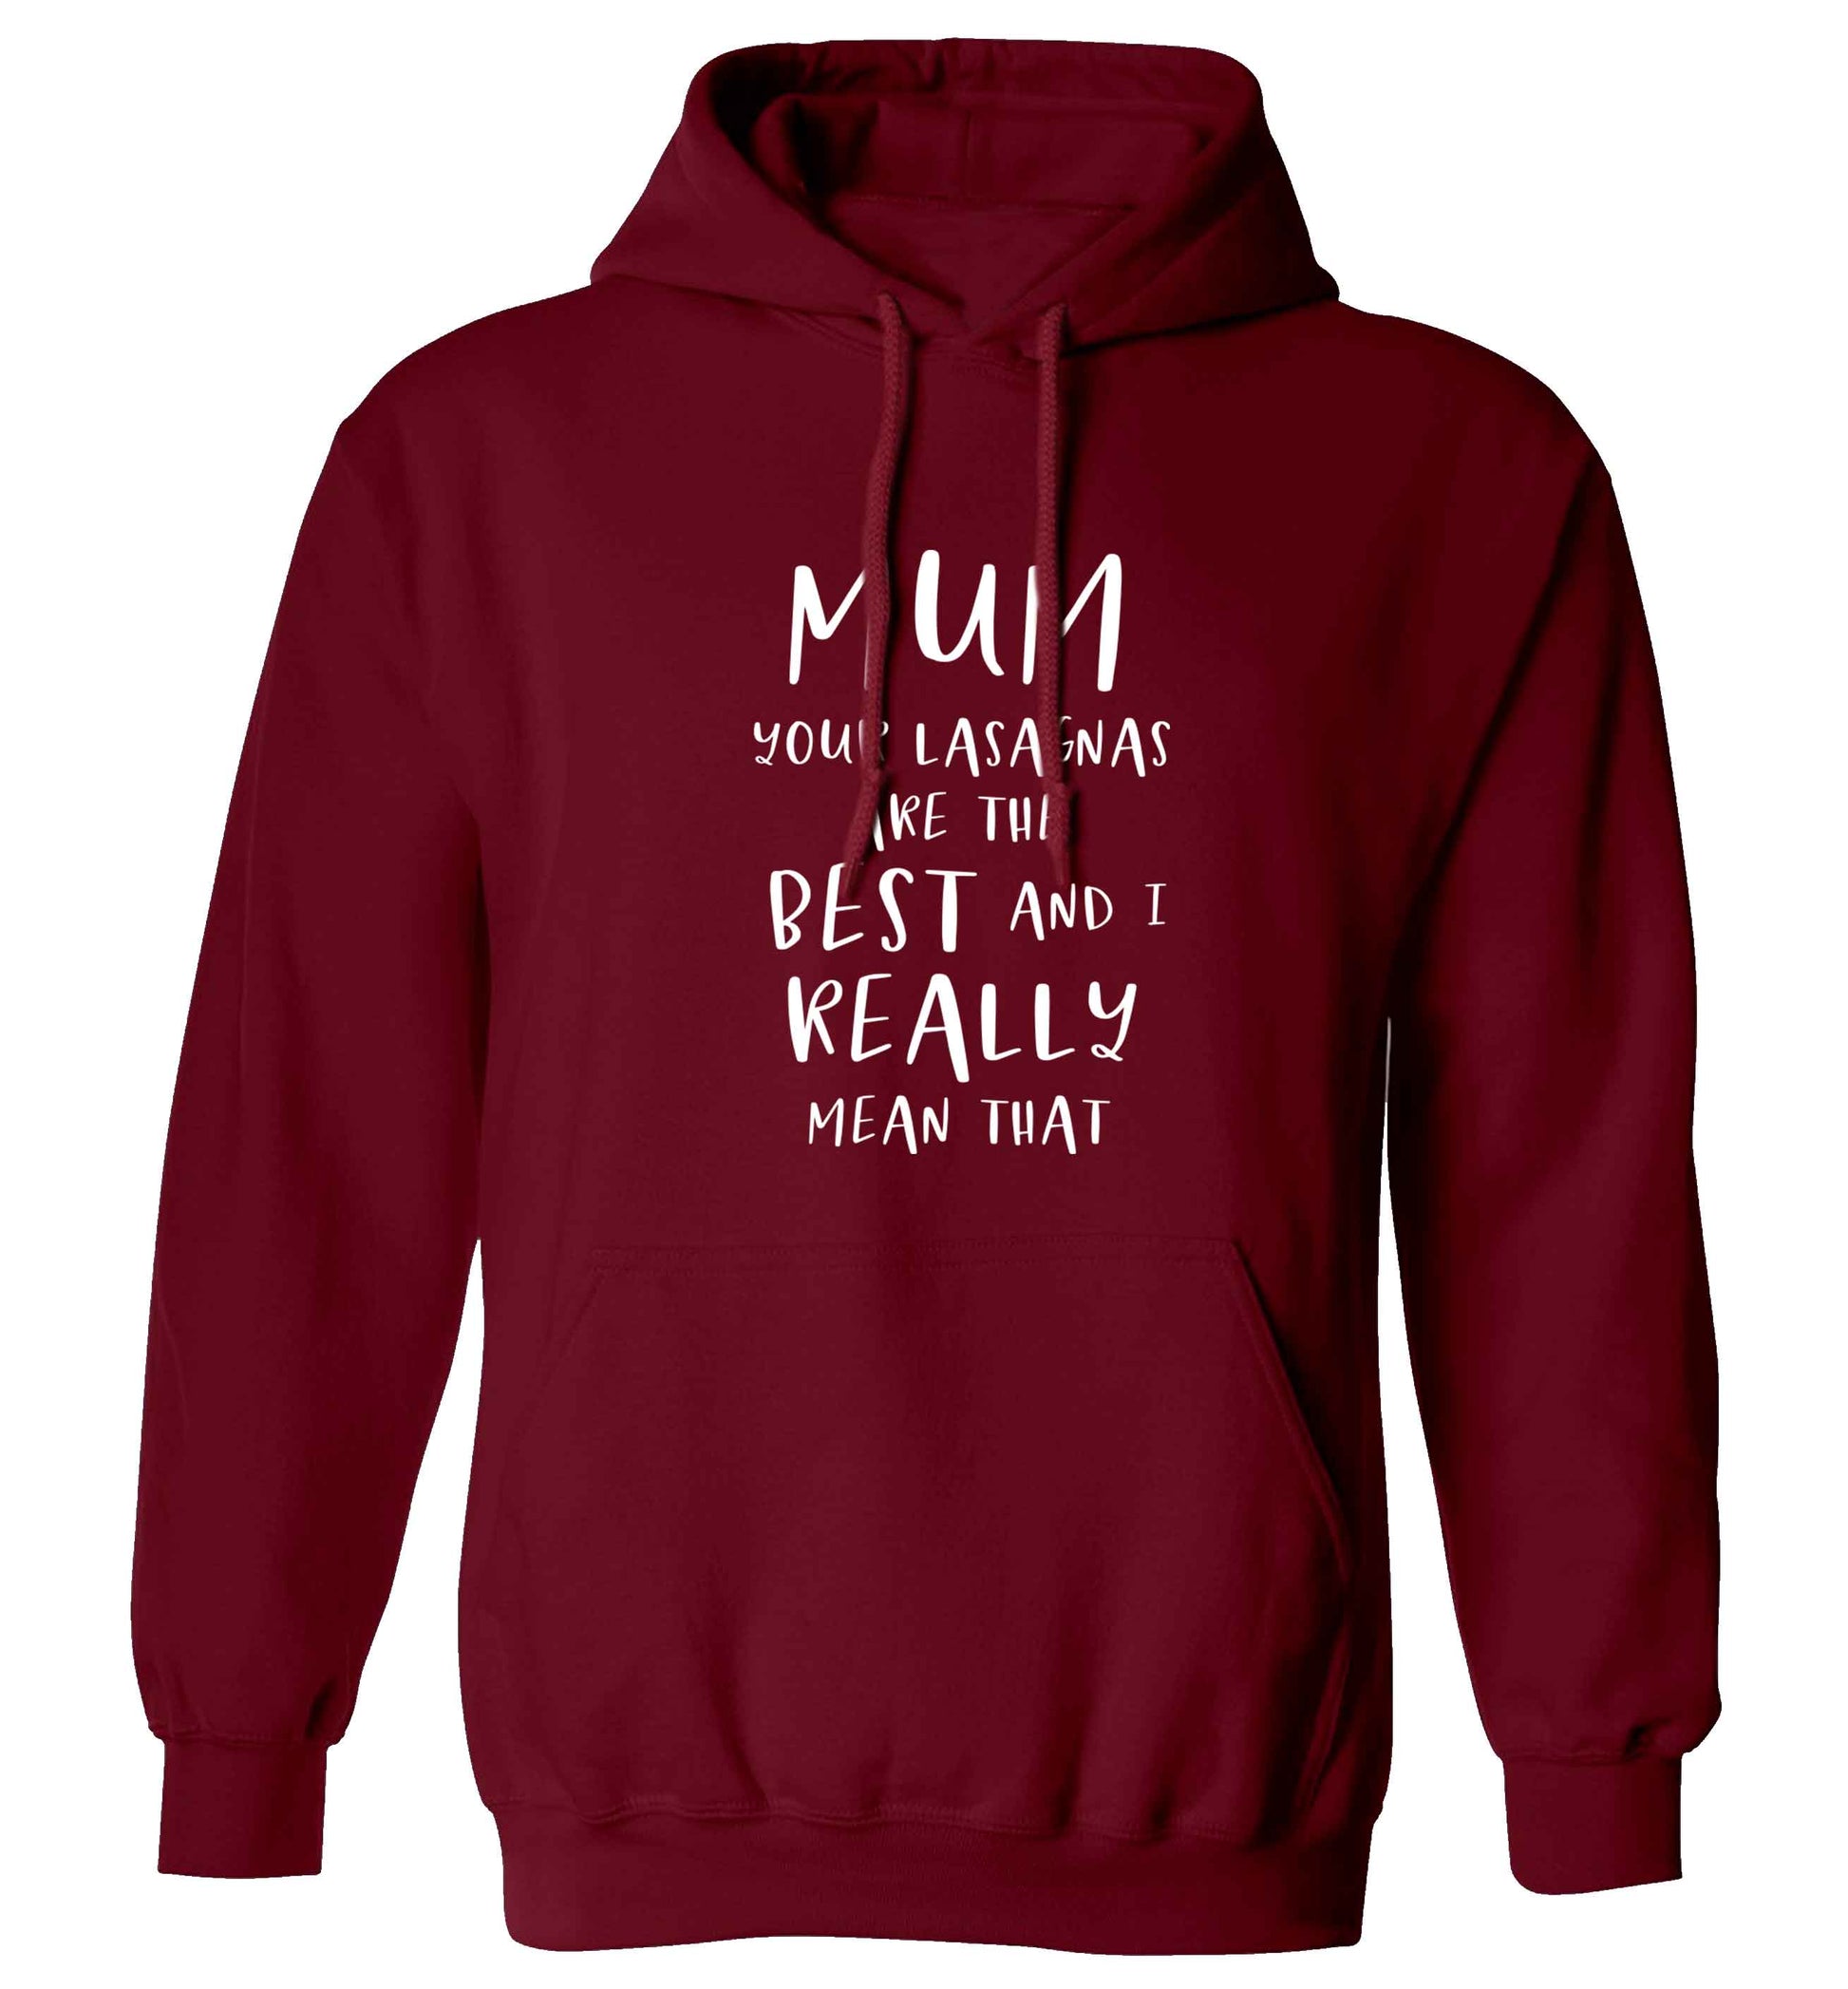 Funny gifts for your mum on mother's dayor her birthday! Mum your lasagnas are the best and I really mean that adults unisex maroon hoodie 2XL